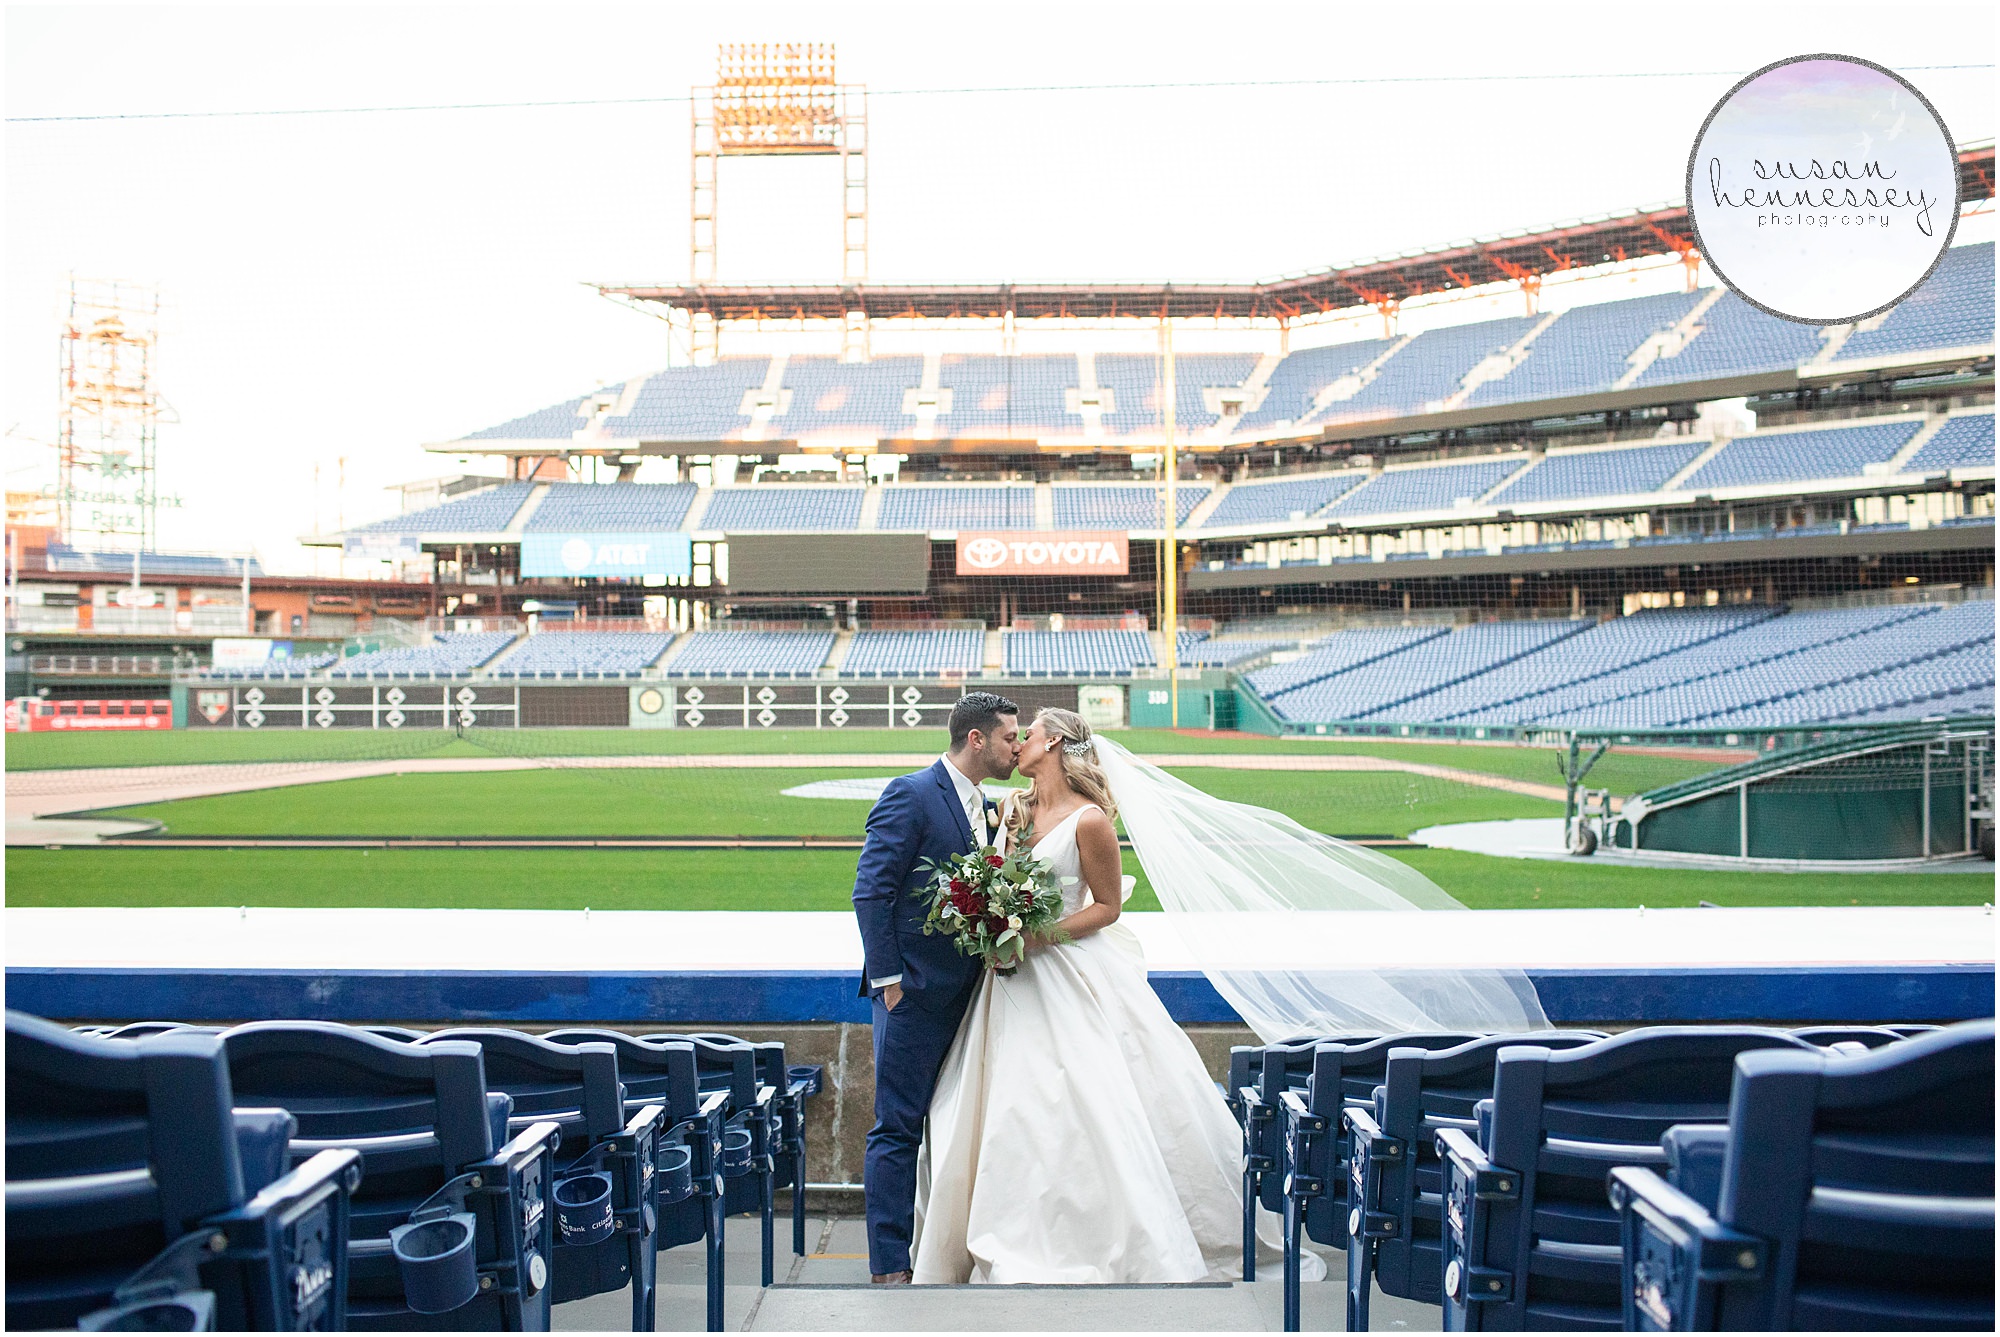 Bride and groom at Citizens Bank Park in Philadelphia.